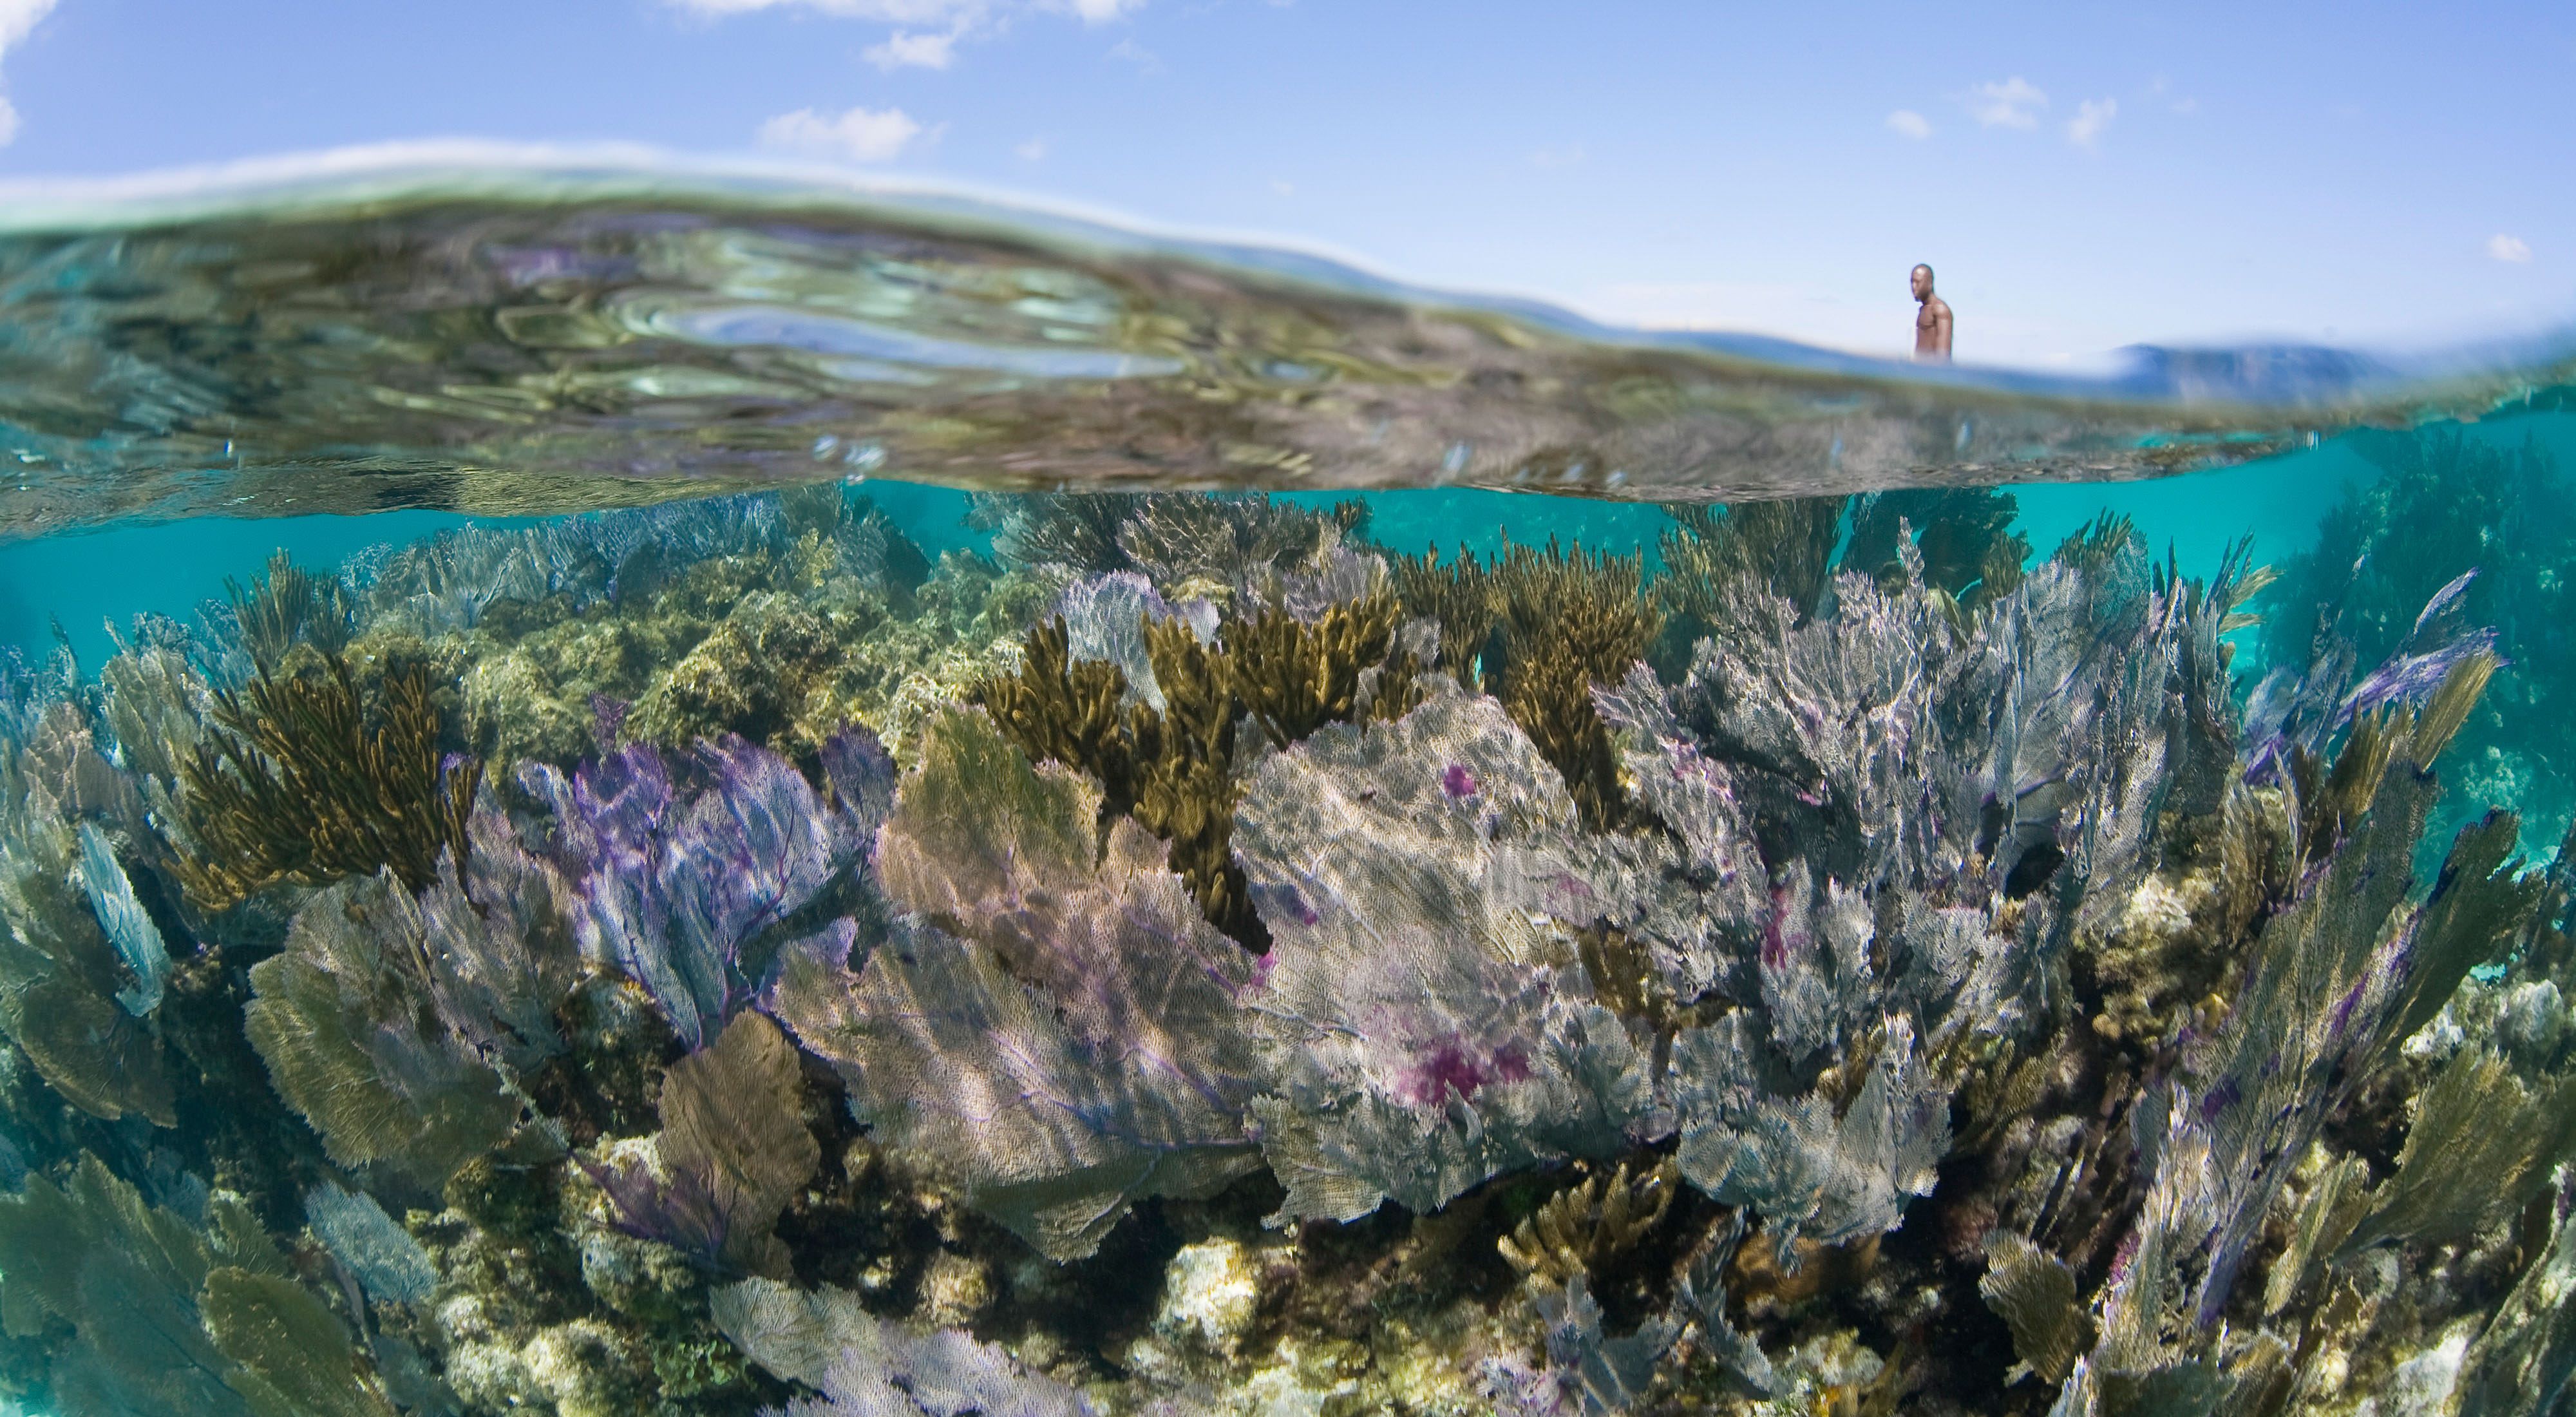 Underwater view of coral reef with blue sky above and a